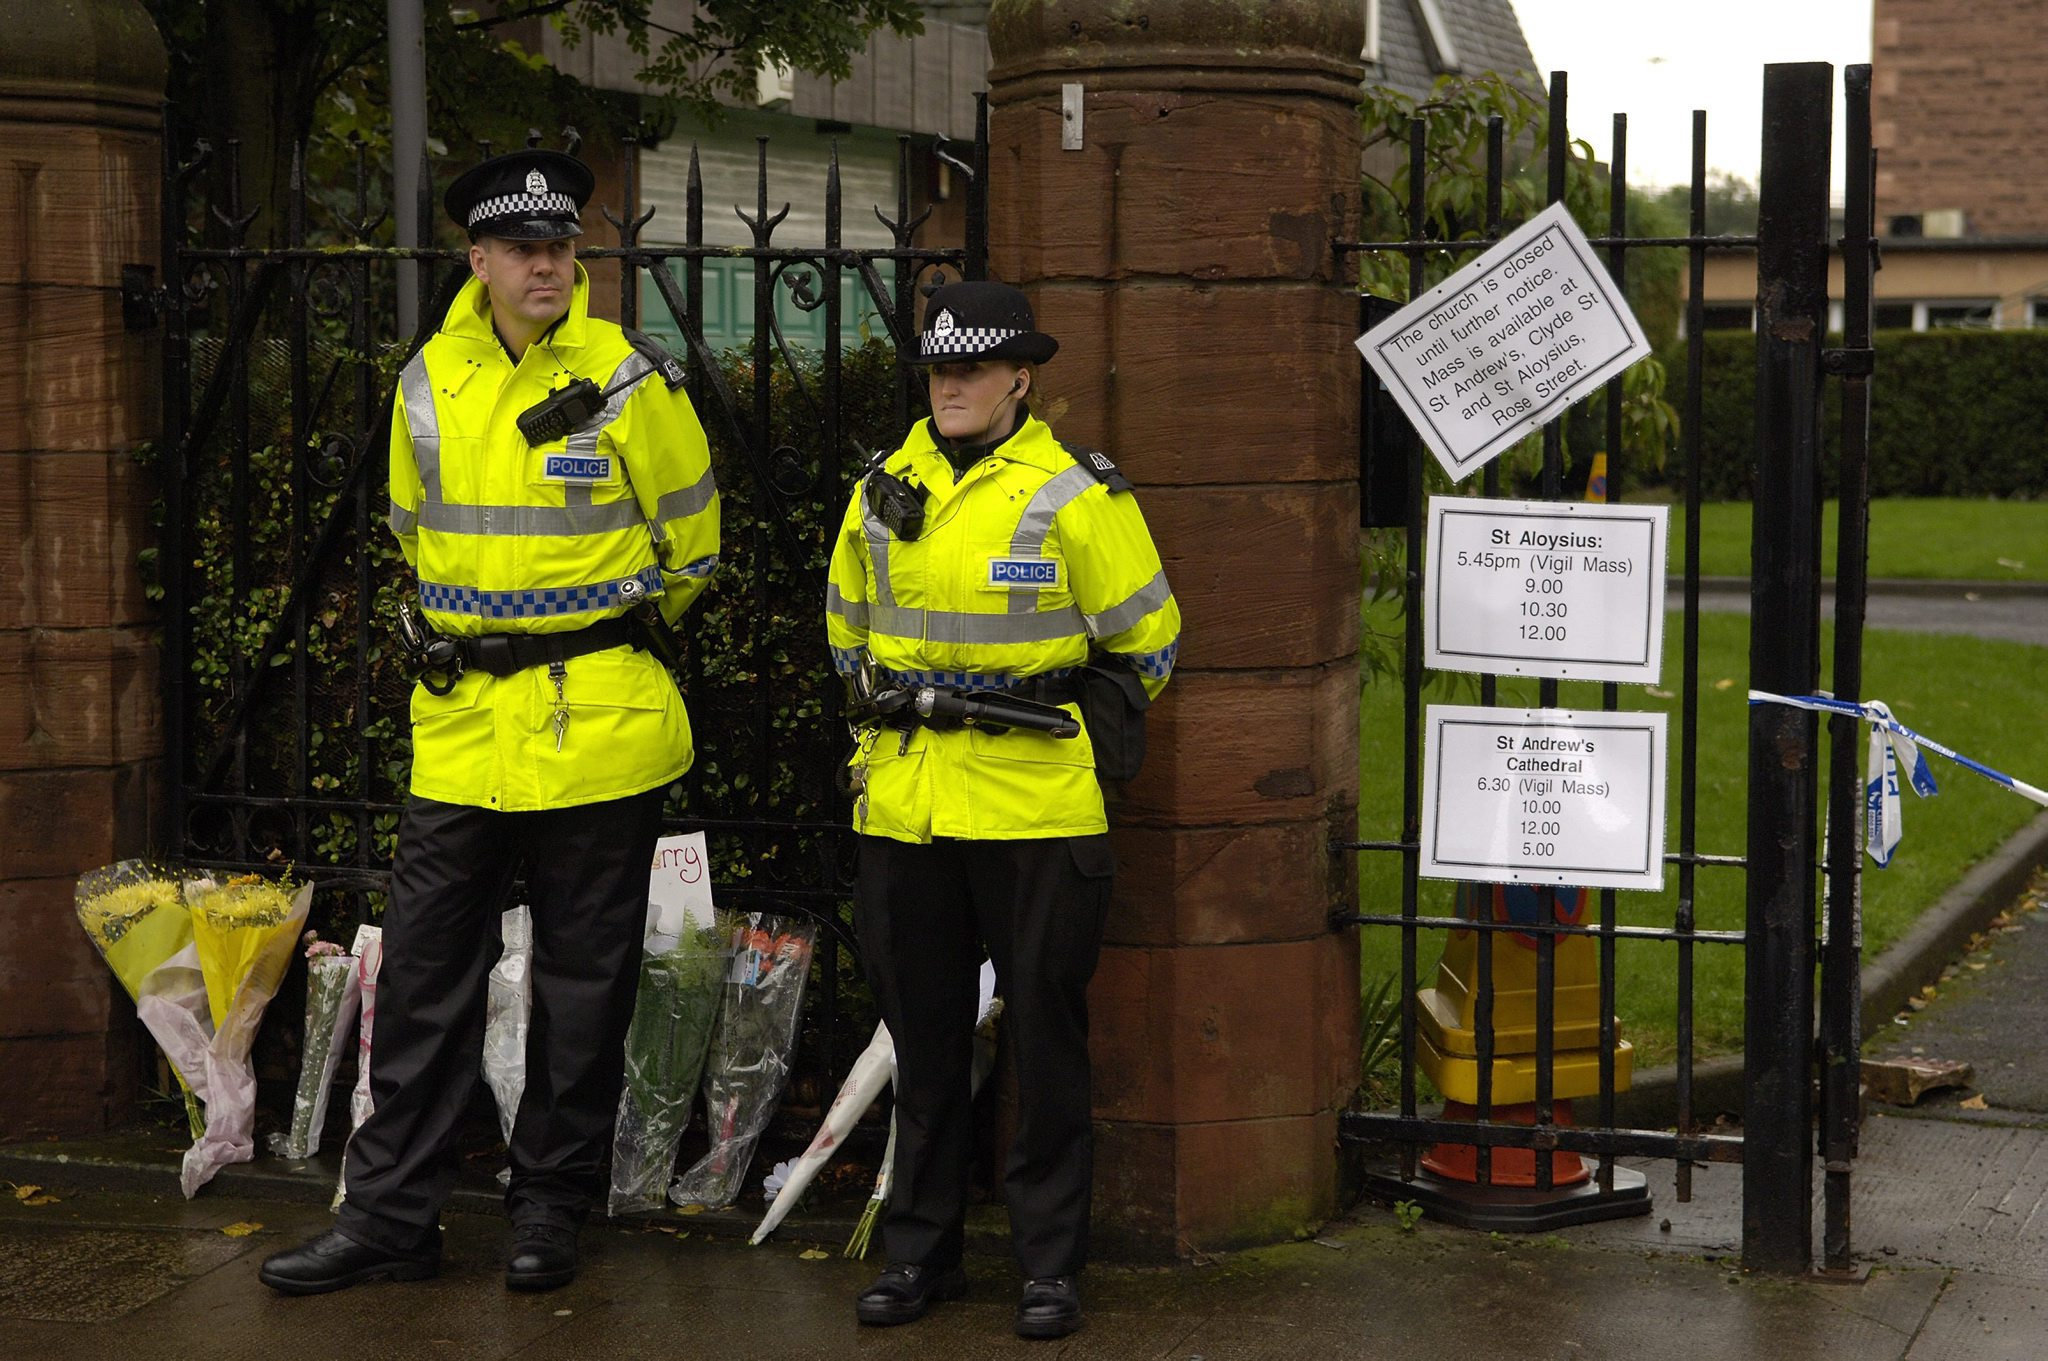 Police outside St Patricks church in Anderston, Glasgow where the body of the missing Polish woman, Angelika Kluk was found